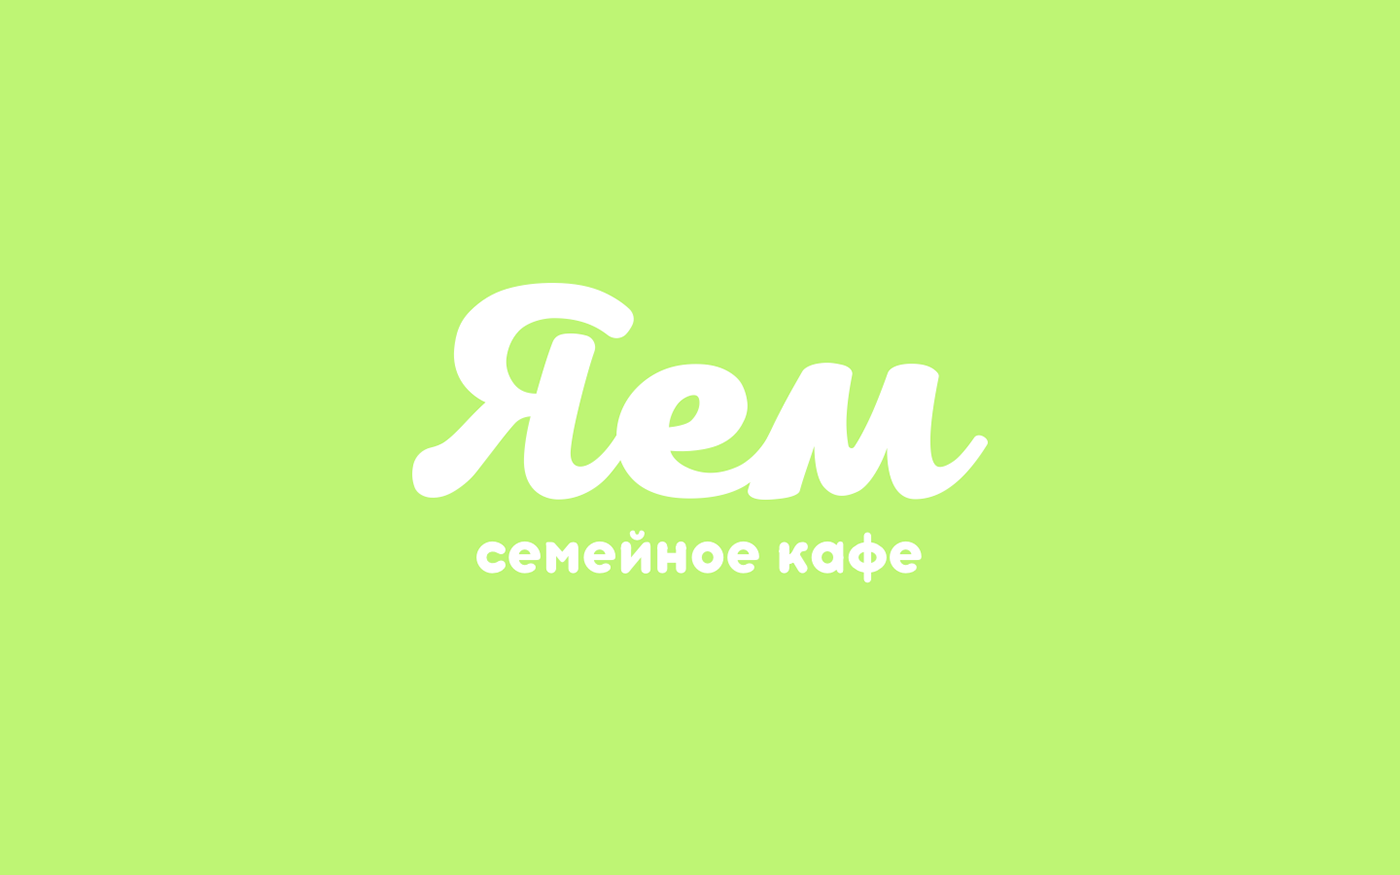 Cafe design delivery cafe delivery cafe brand family cafe family cafe brand family cafe logo семейное кафе семейное кафе логотип ЯЕМ ЯЕМ логотип